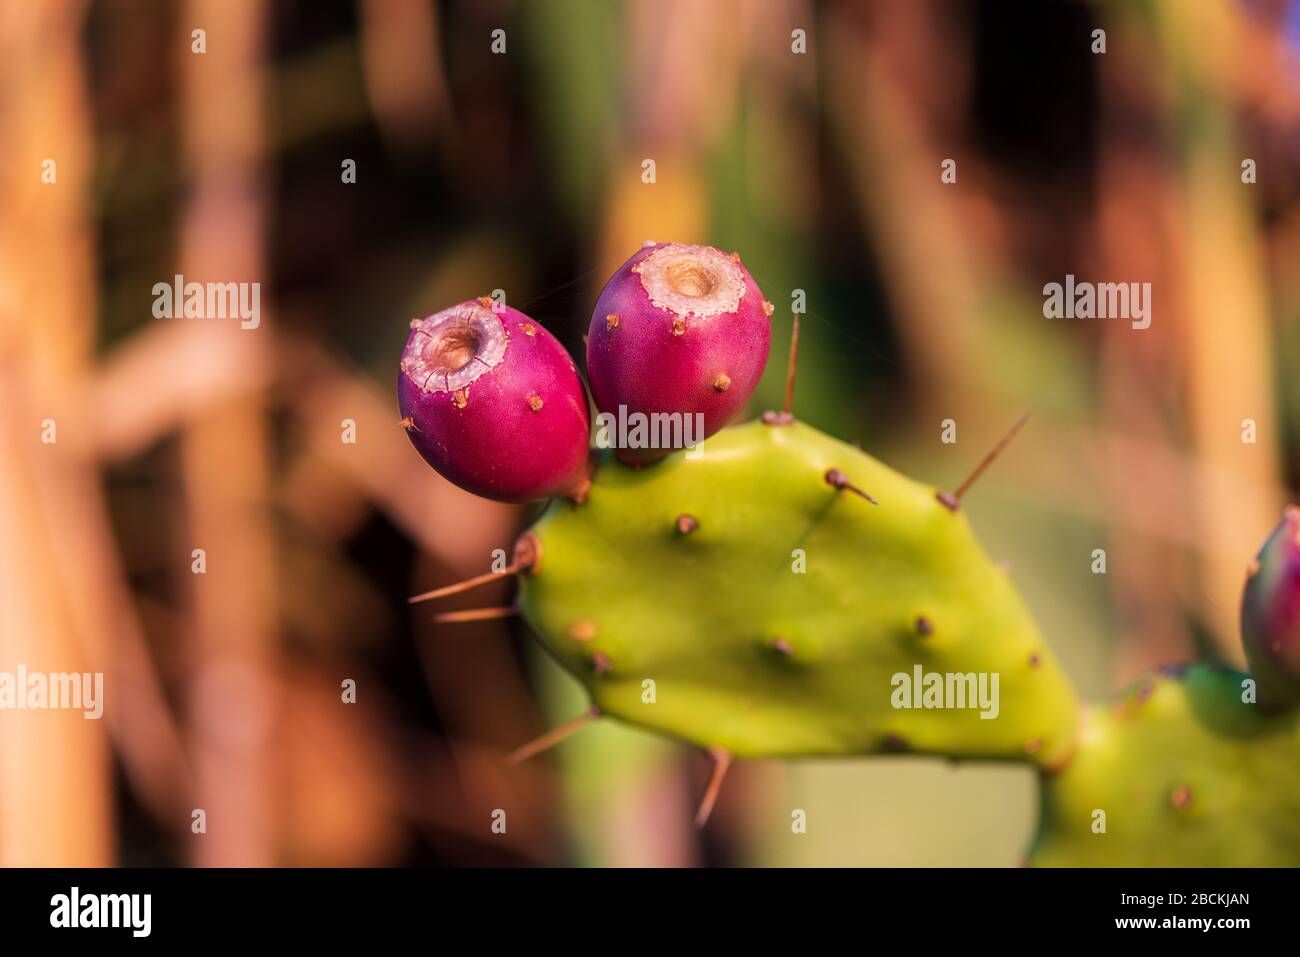 Prickly Pear Cactus With Fruit In Purple Color Opuntia Fico D India Cactus Spines Stock Photo Alamy